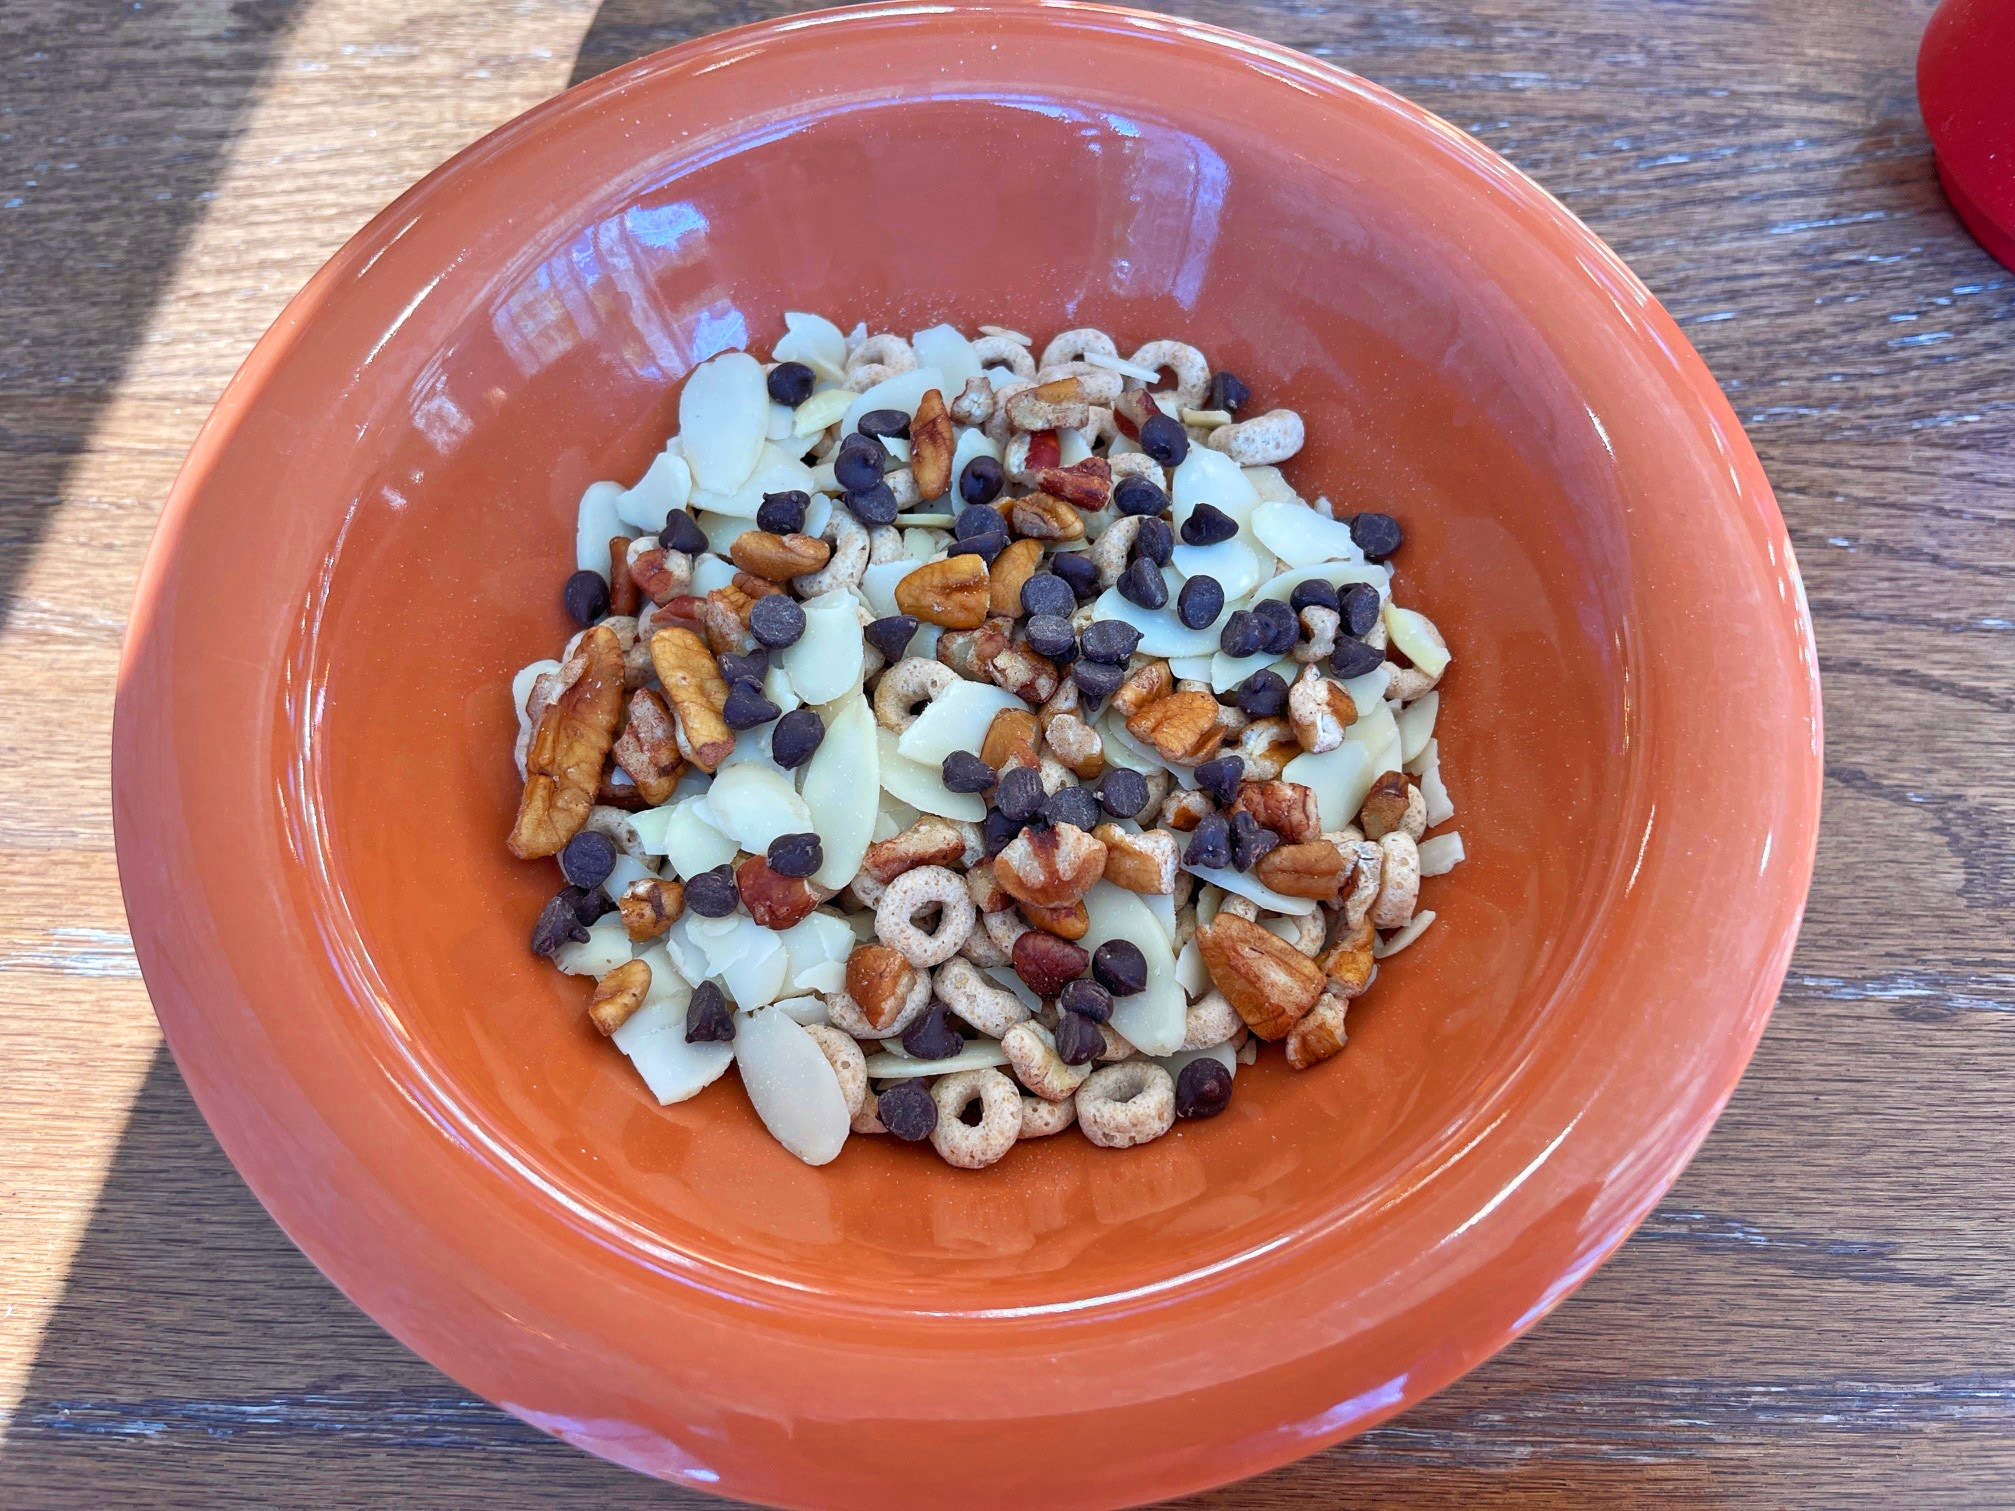 A photograph of a bowl filled with chopped almonds and walnuts, chocolate chips, and cherios.